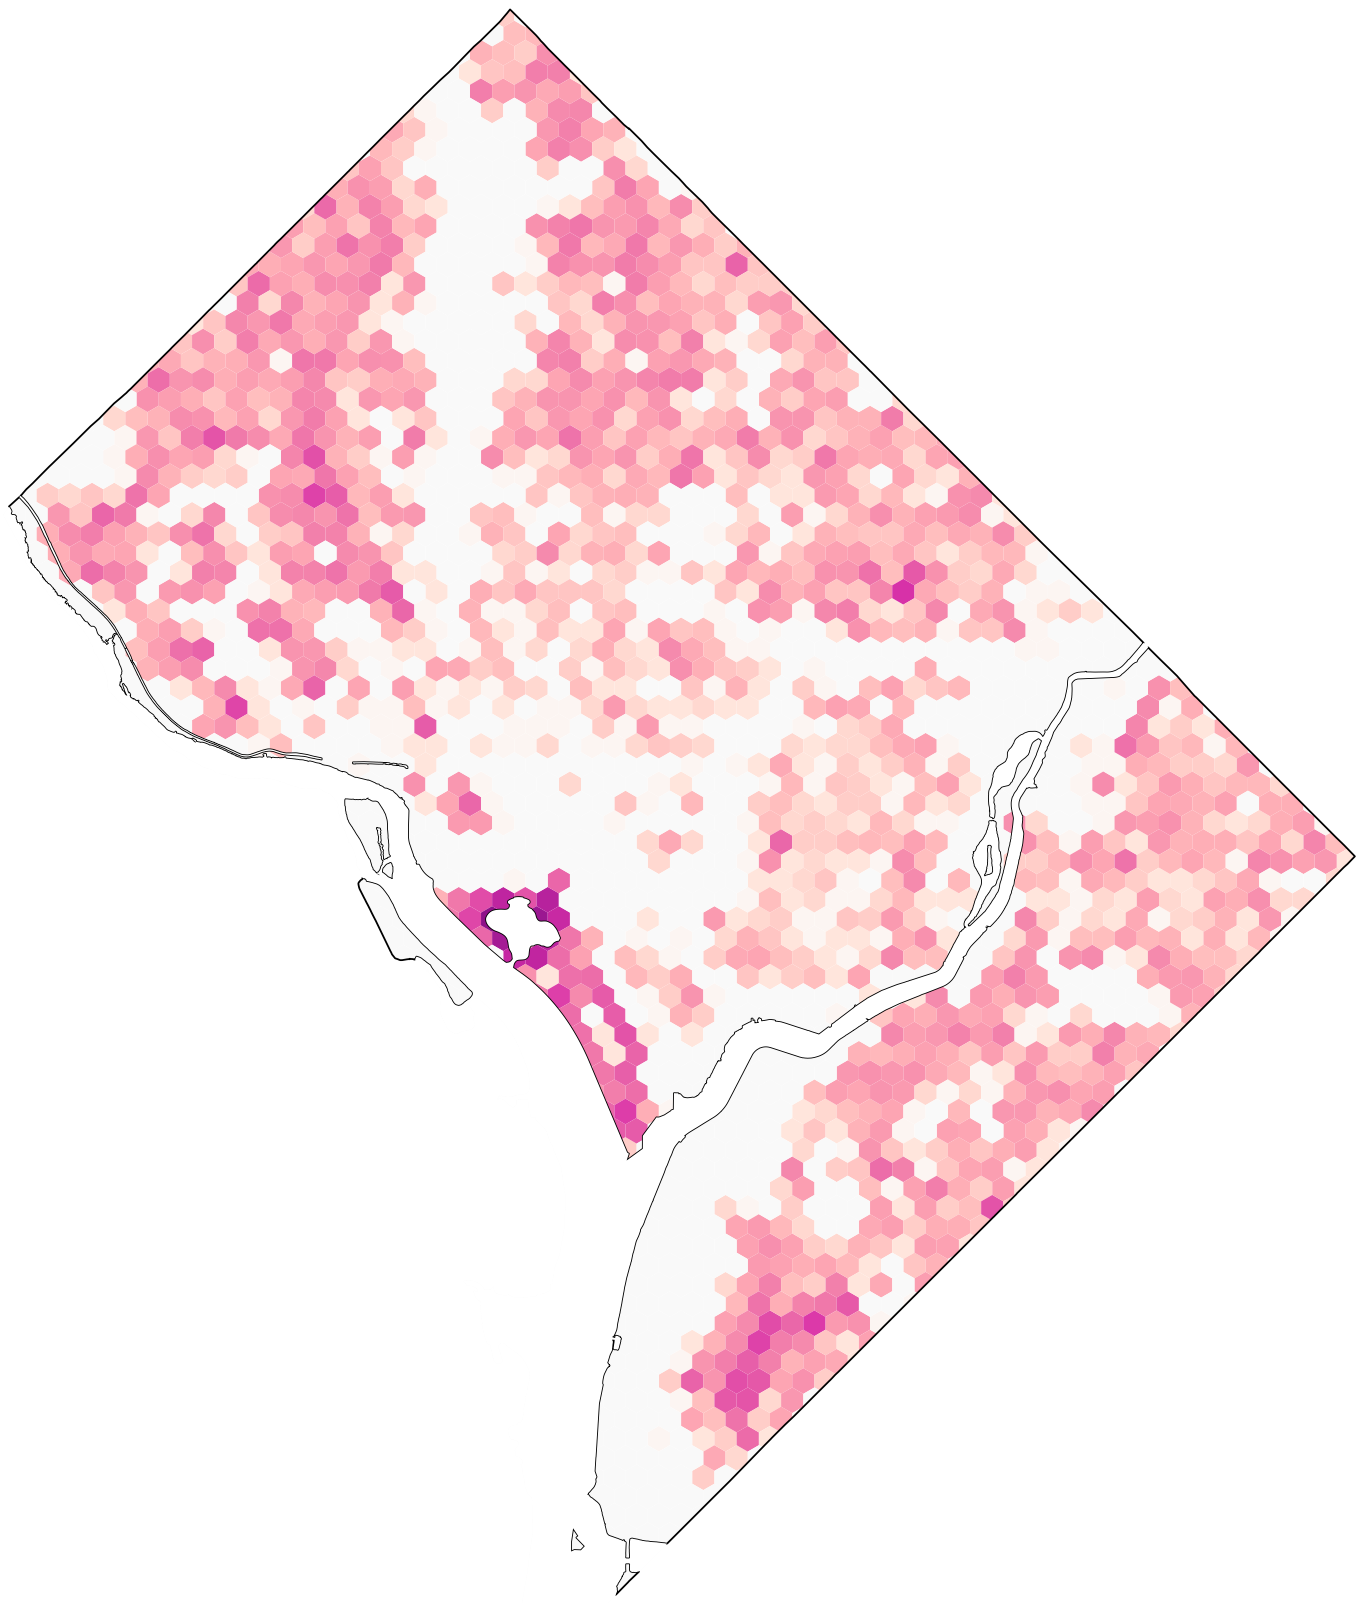 Map of DC showing density of cherry blossom trees